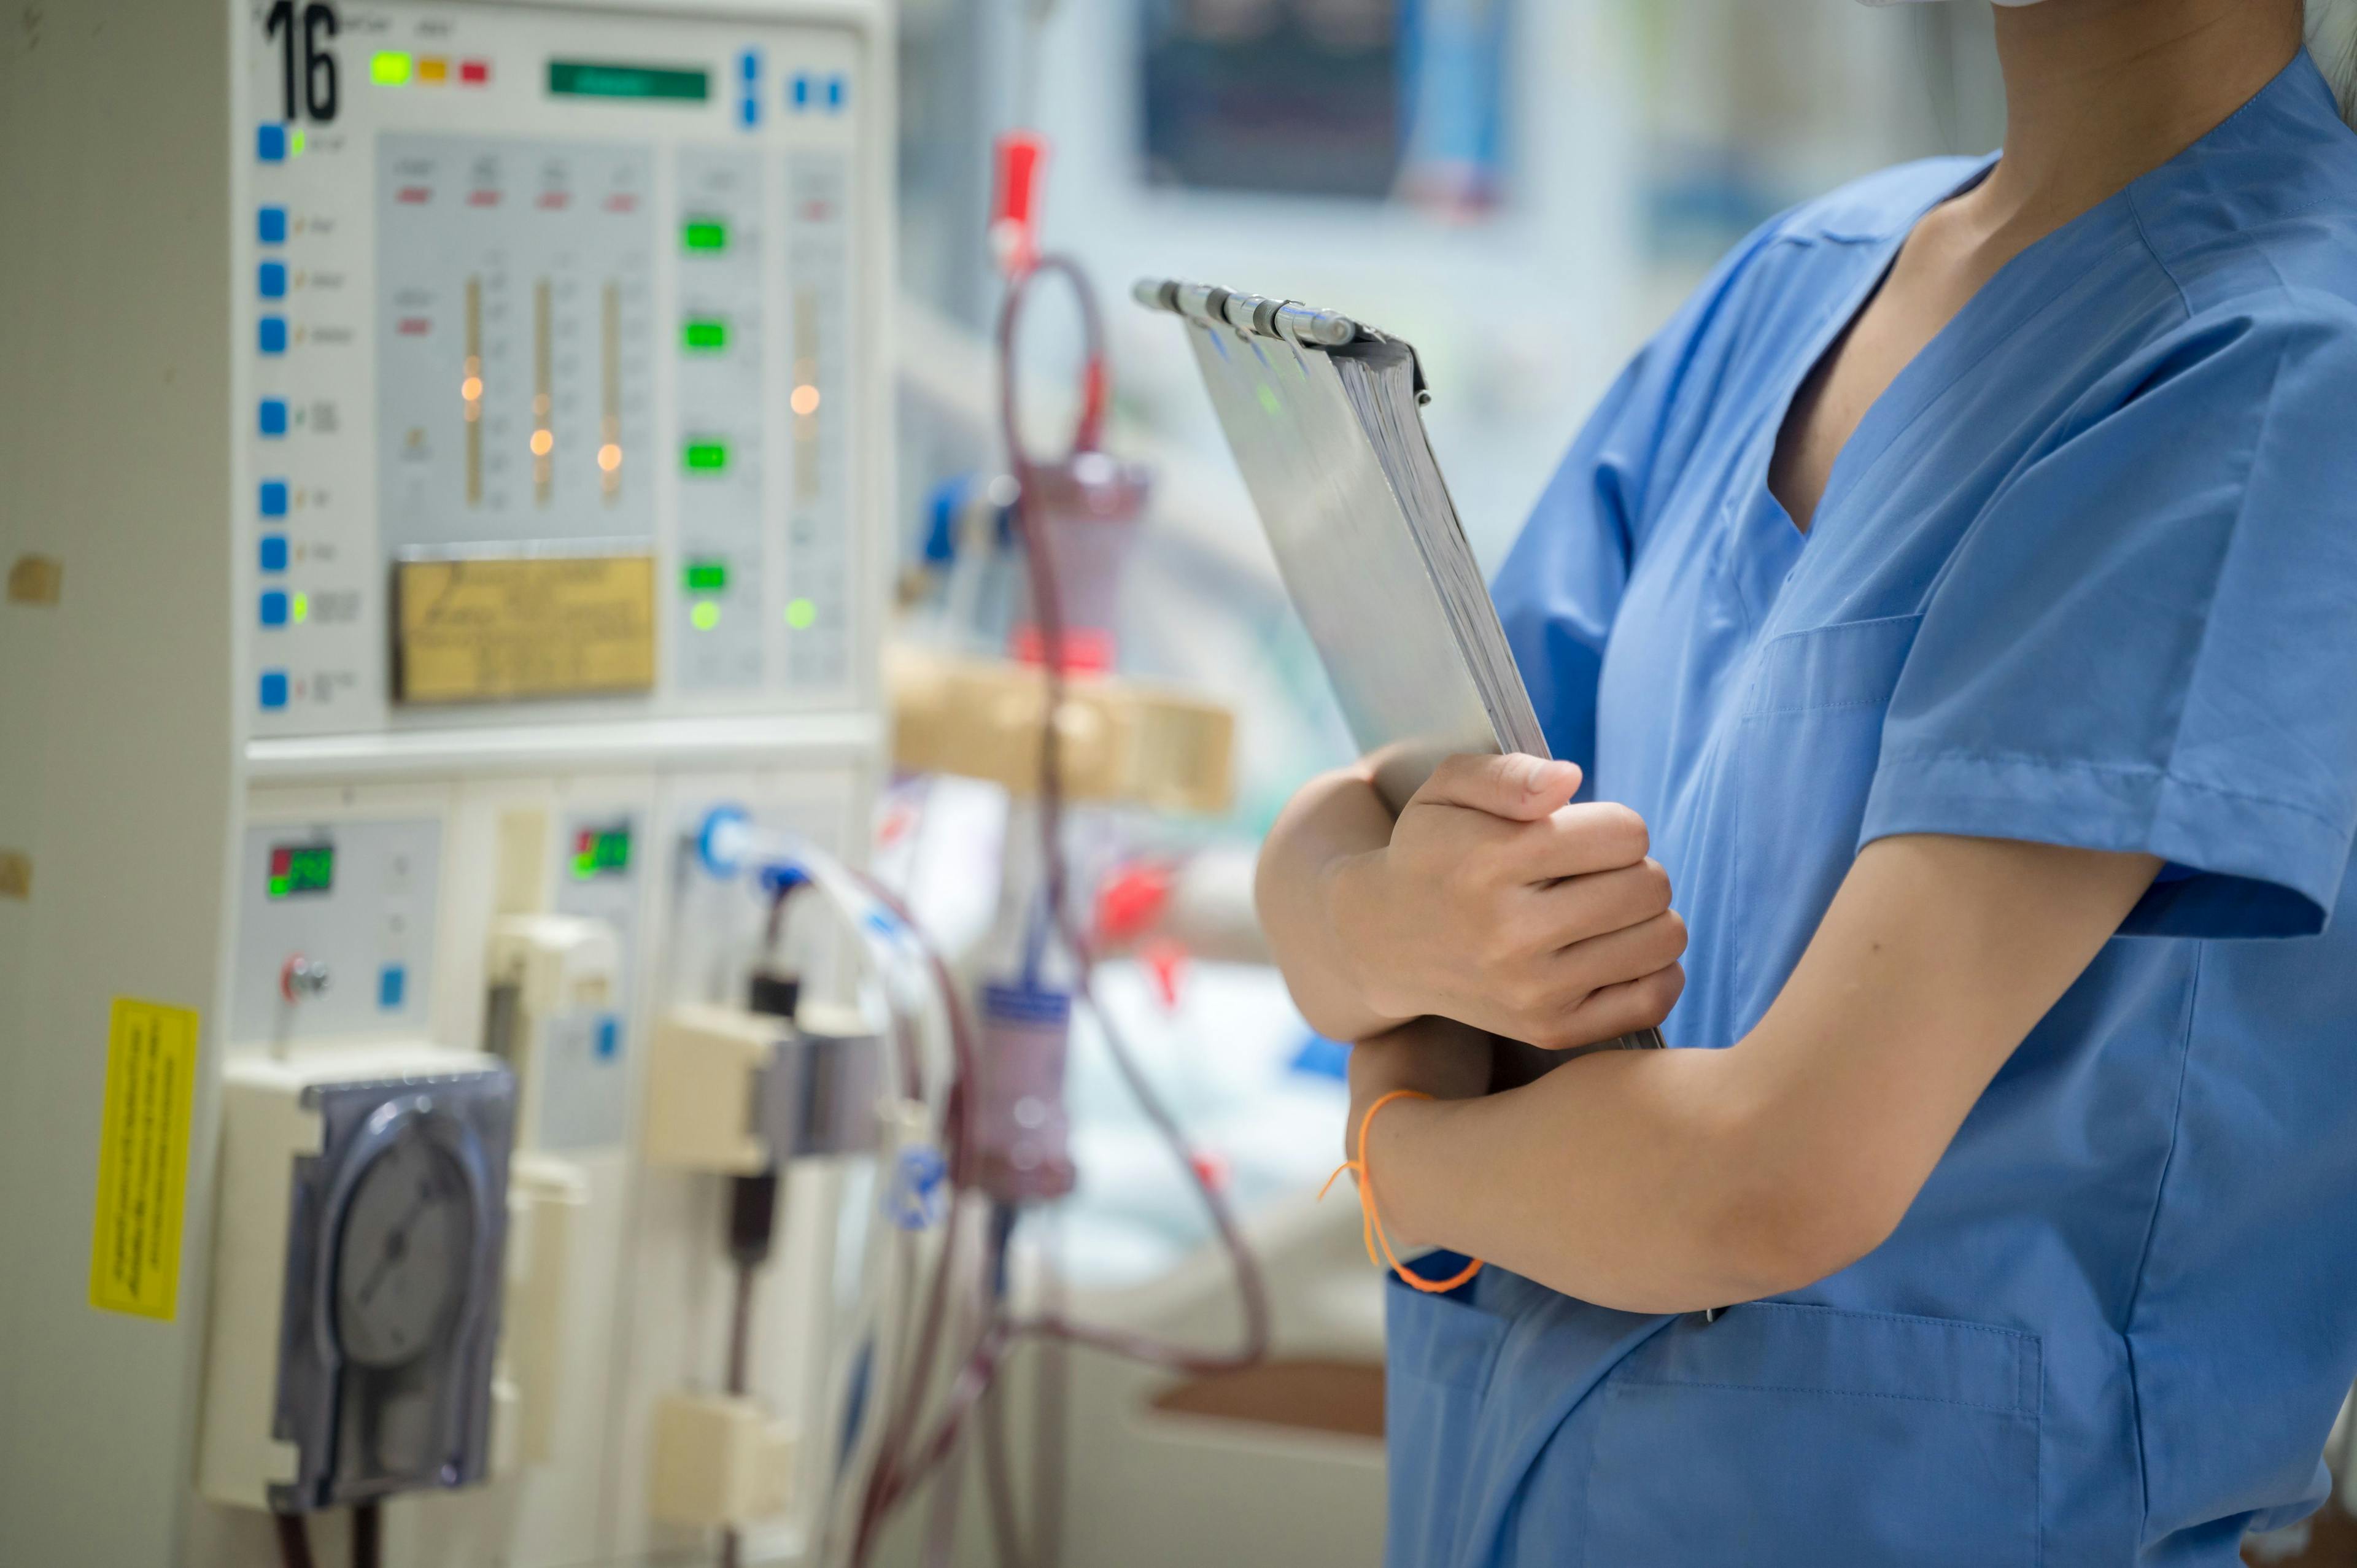 Experts in kidney disease say the latest proposed rule regarding Medicare reimbursement for dialysis represents a missed opportunity. (Image credit: ©Hospital man - stock.adobe.com)